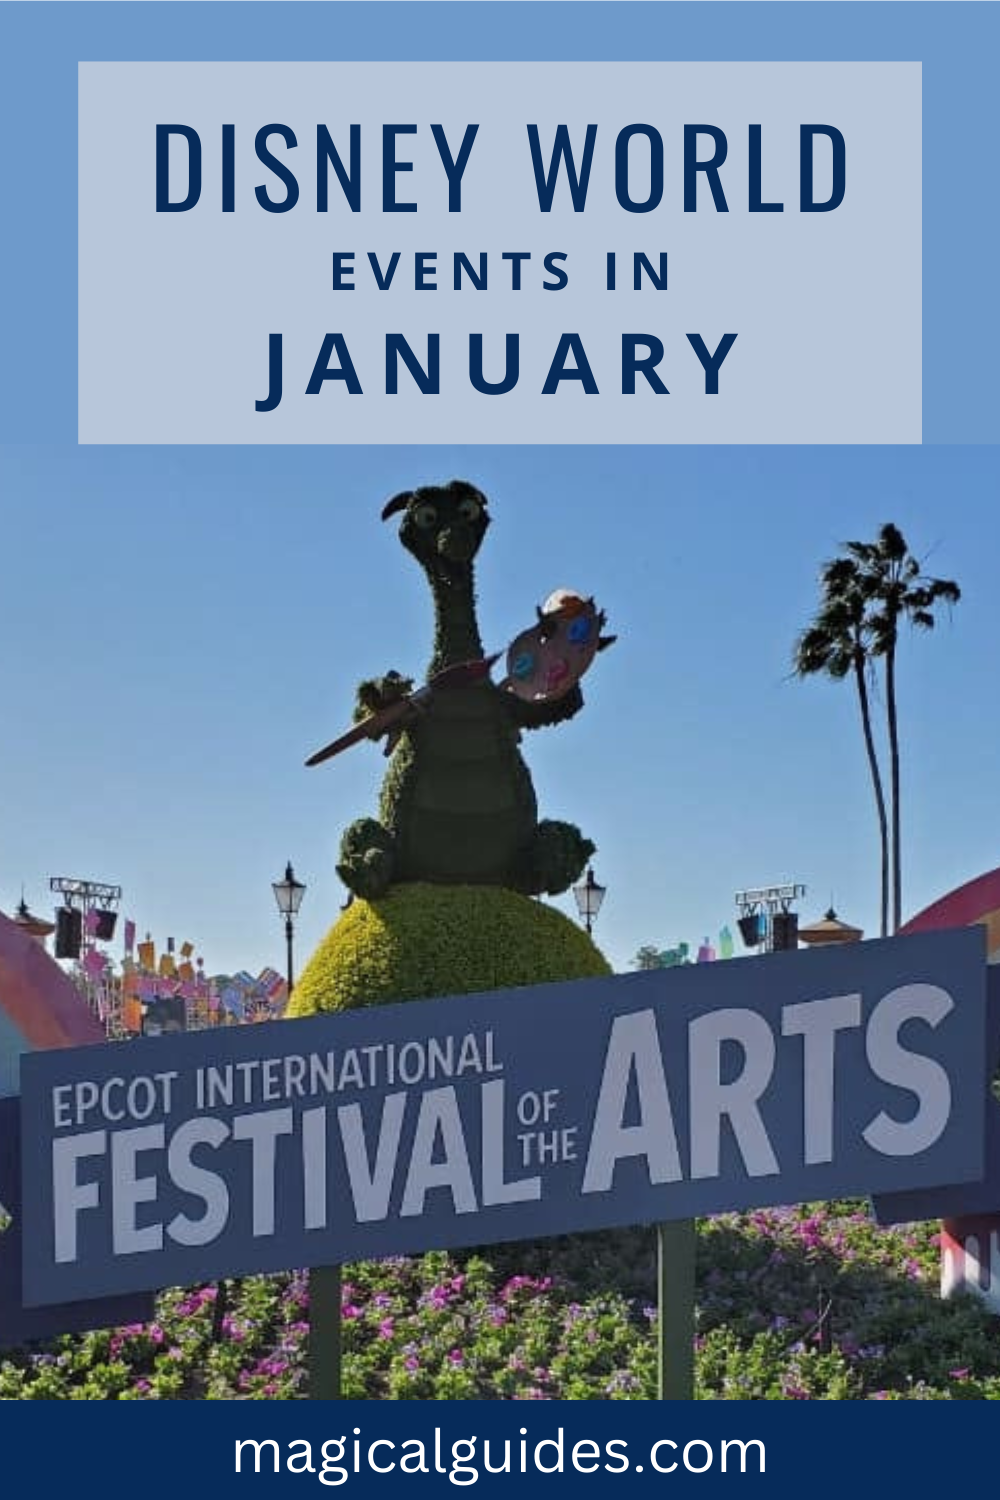 Find a complete guide for what to wear and what to pack for Disney World in January. You can also find typical January temperatures and weather to help you decide what to wear. See all of the events happening is Disney World in January.